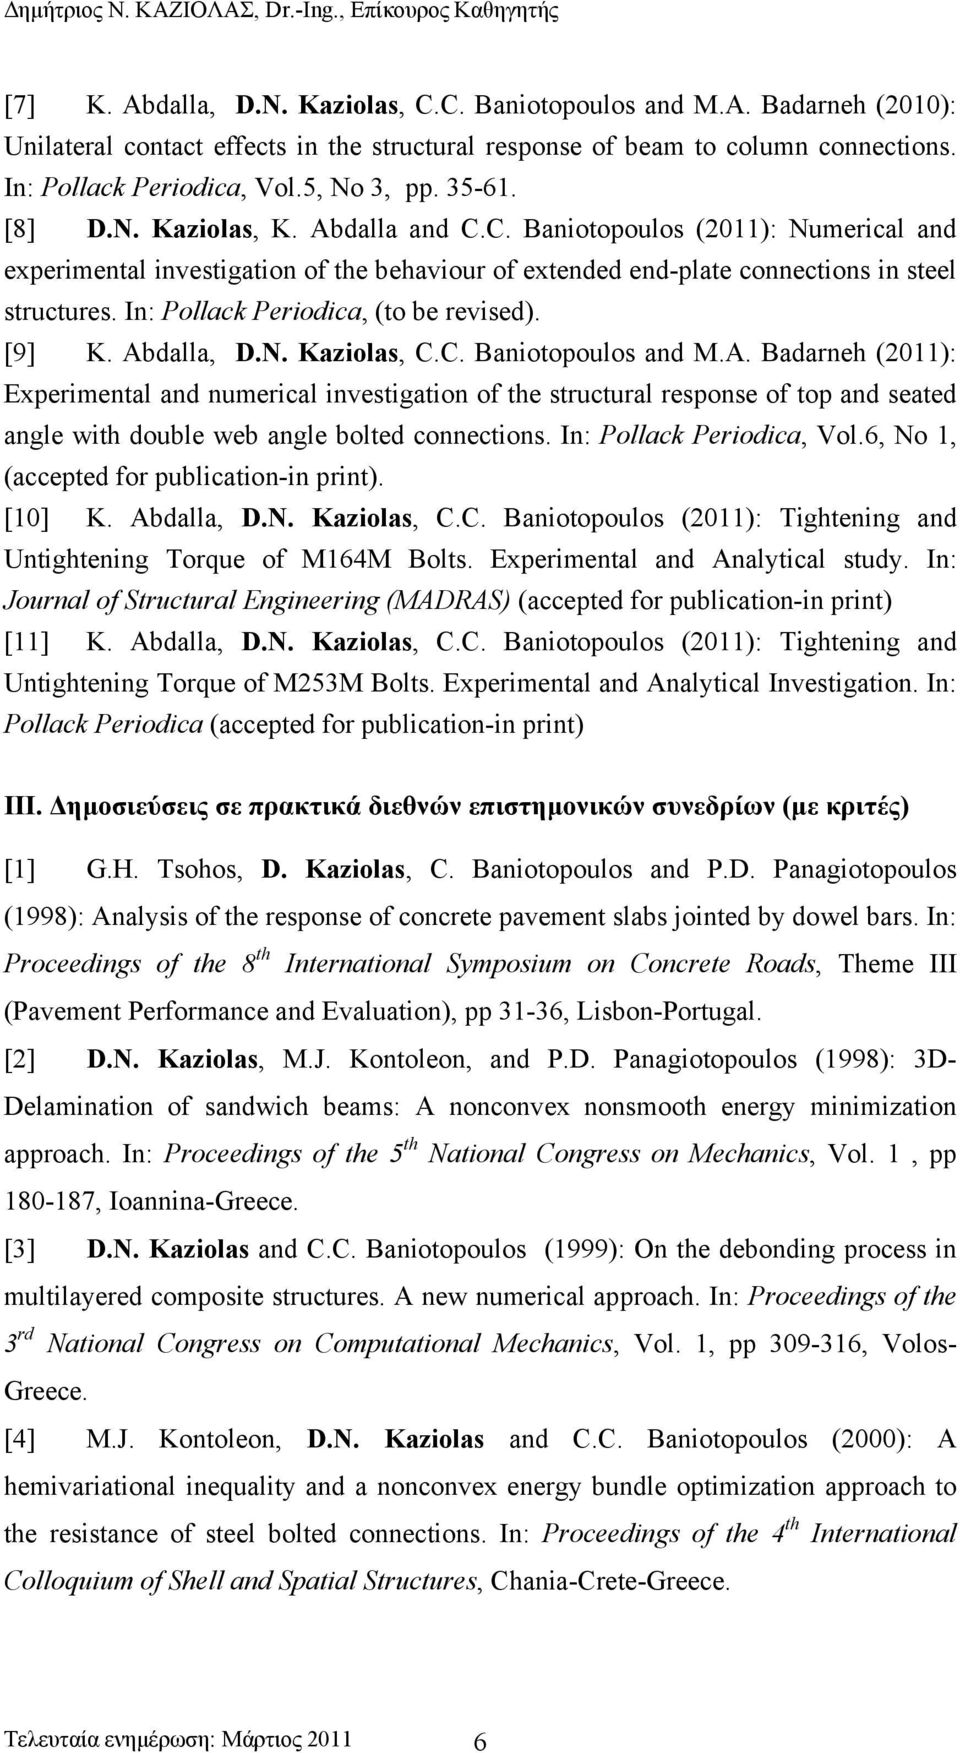 In: Pollack Periodica, (to be revised). [9] Κ. Abdalla, D.N. Kaziolas, C.C. Baniotopoulos and M.A. Badarneh (2011): Experimental and numerical investigation of the structural response of top and seated angle with double web angle bolted connections.